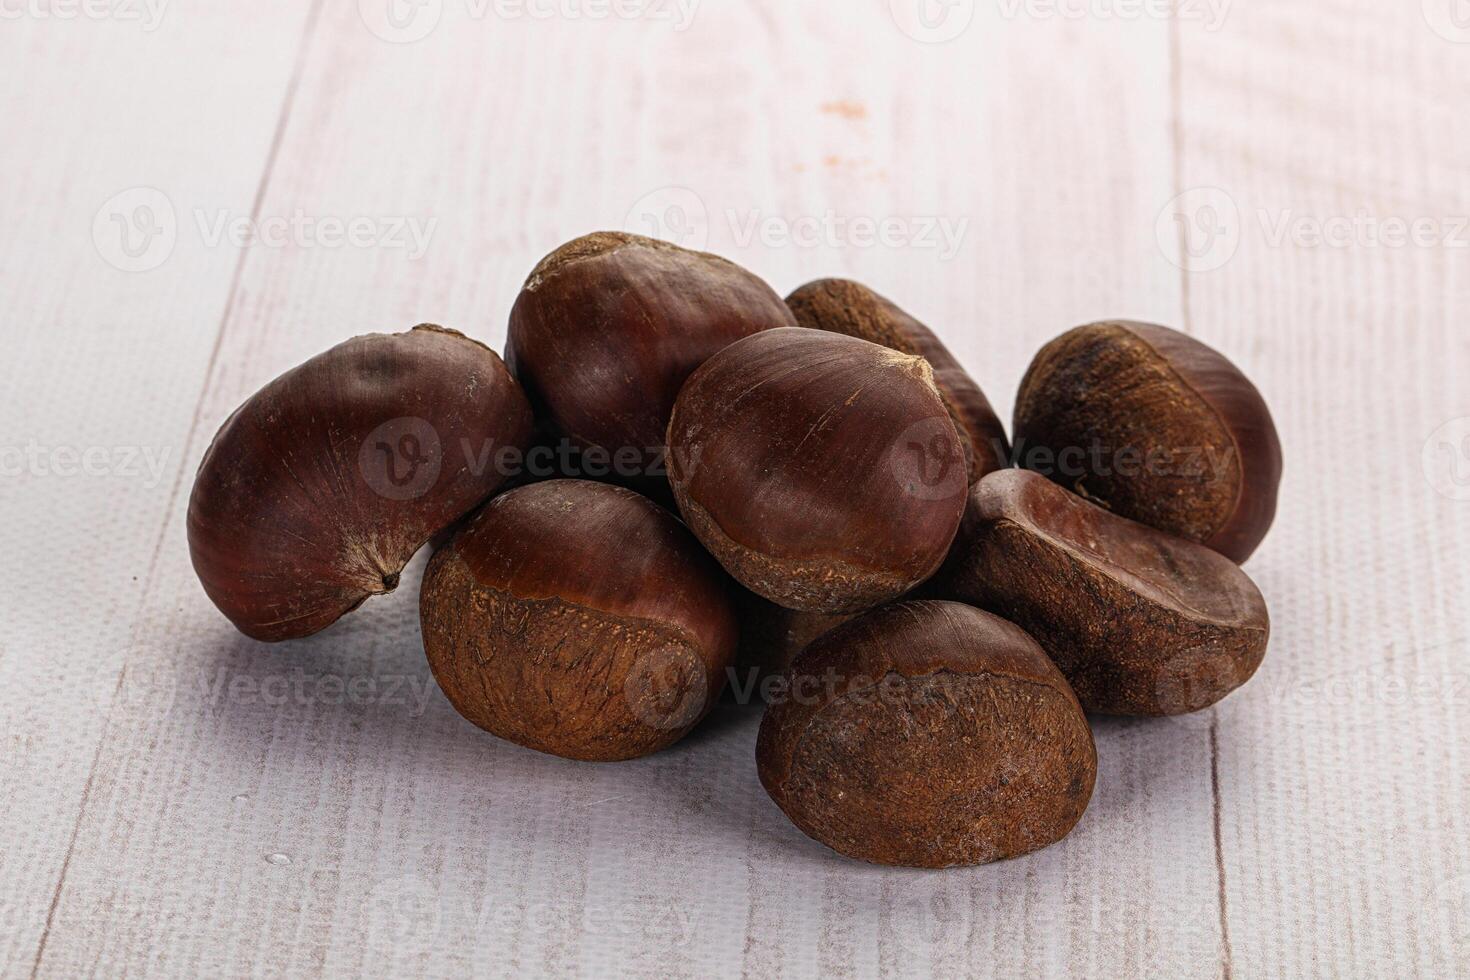 Tasty delicous brown natural Chestnut photo